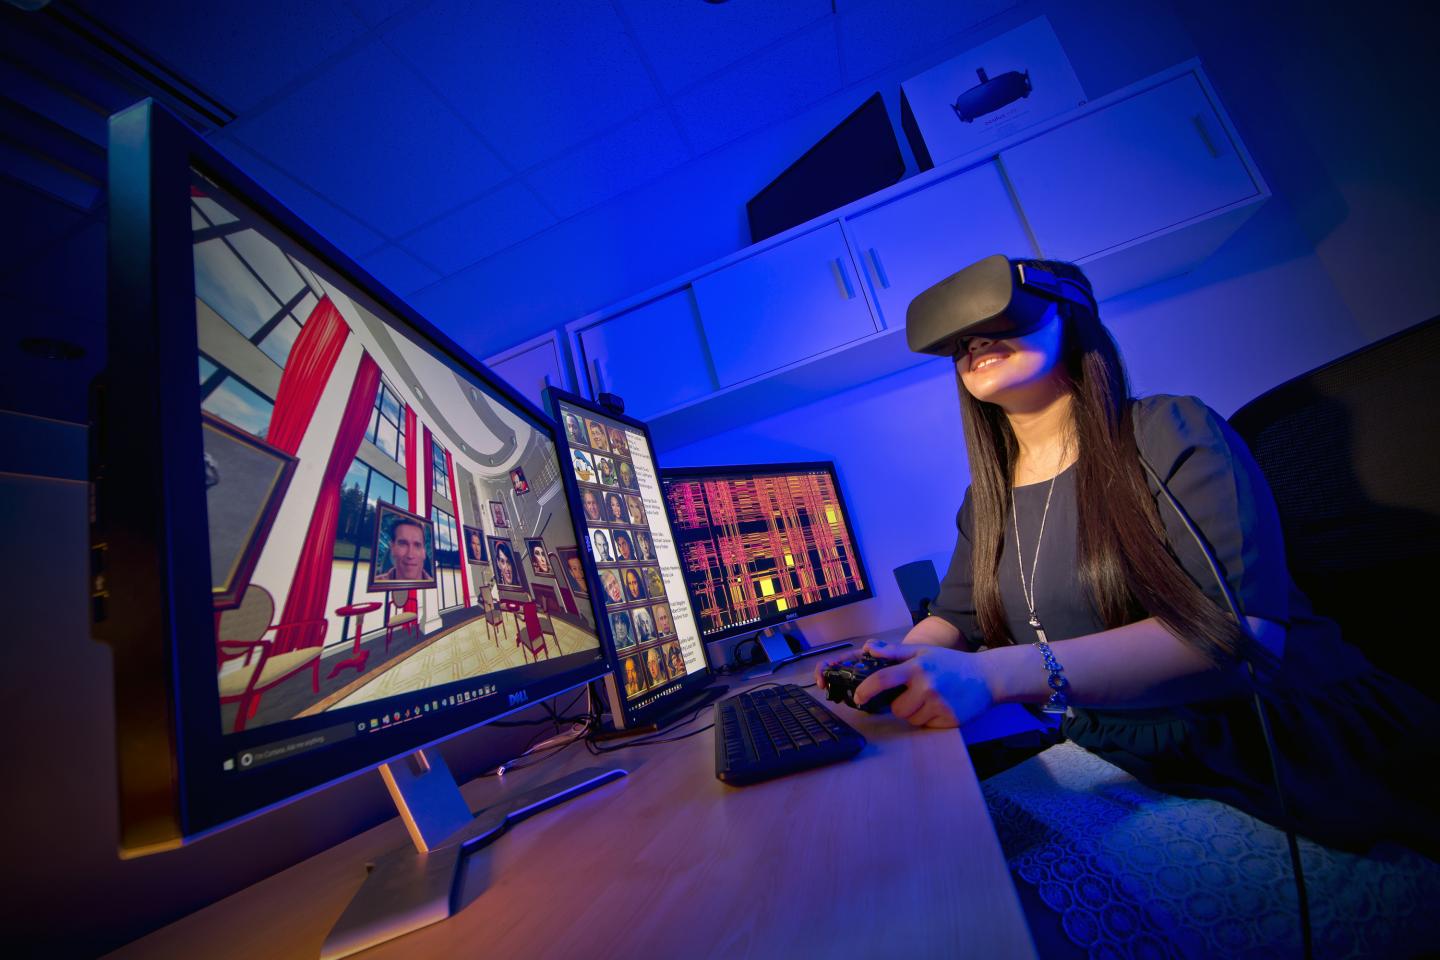 University of Maryland researchers conducted one of the first in-depth analyses on whether people recall information better through virtual reality, as opposed to desktop computers. Source: John T. Consoli / University of Maryland